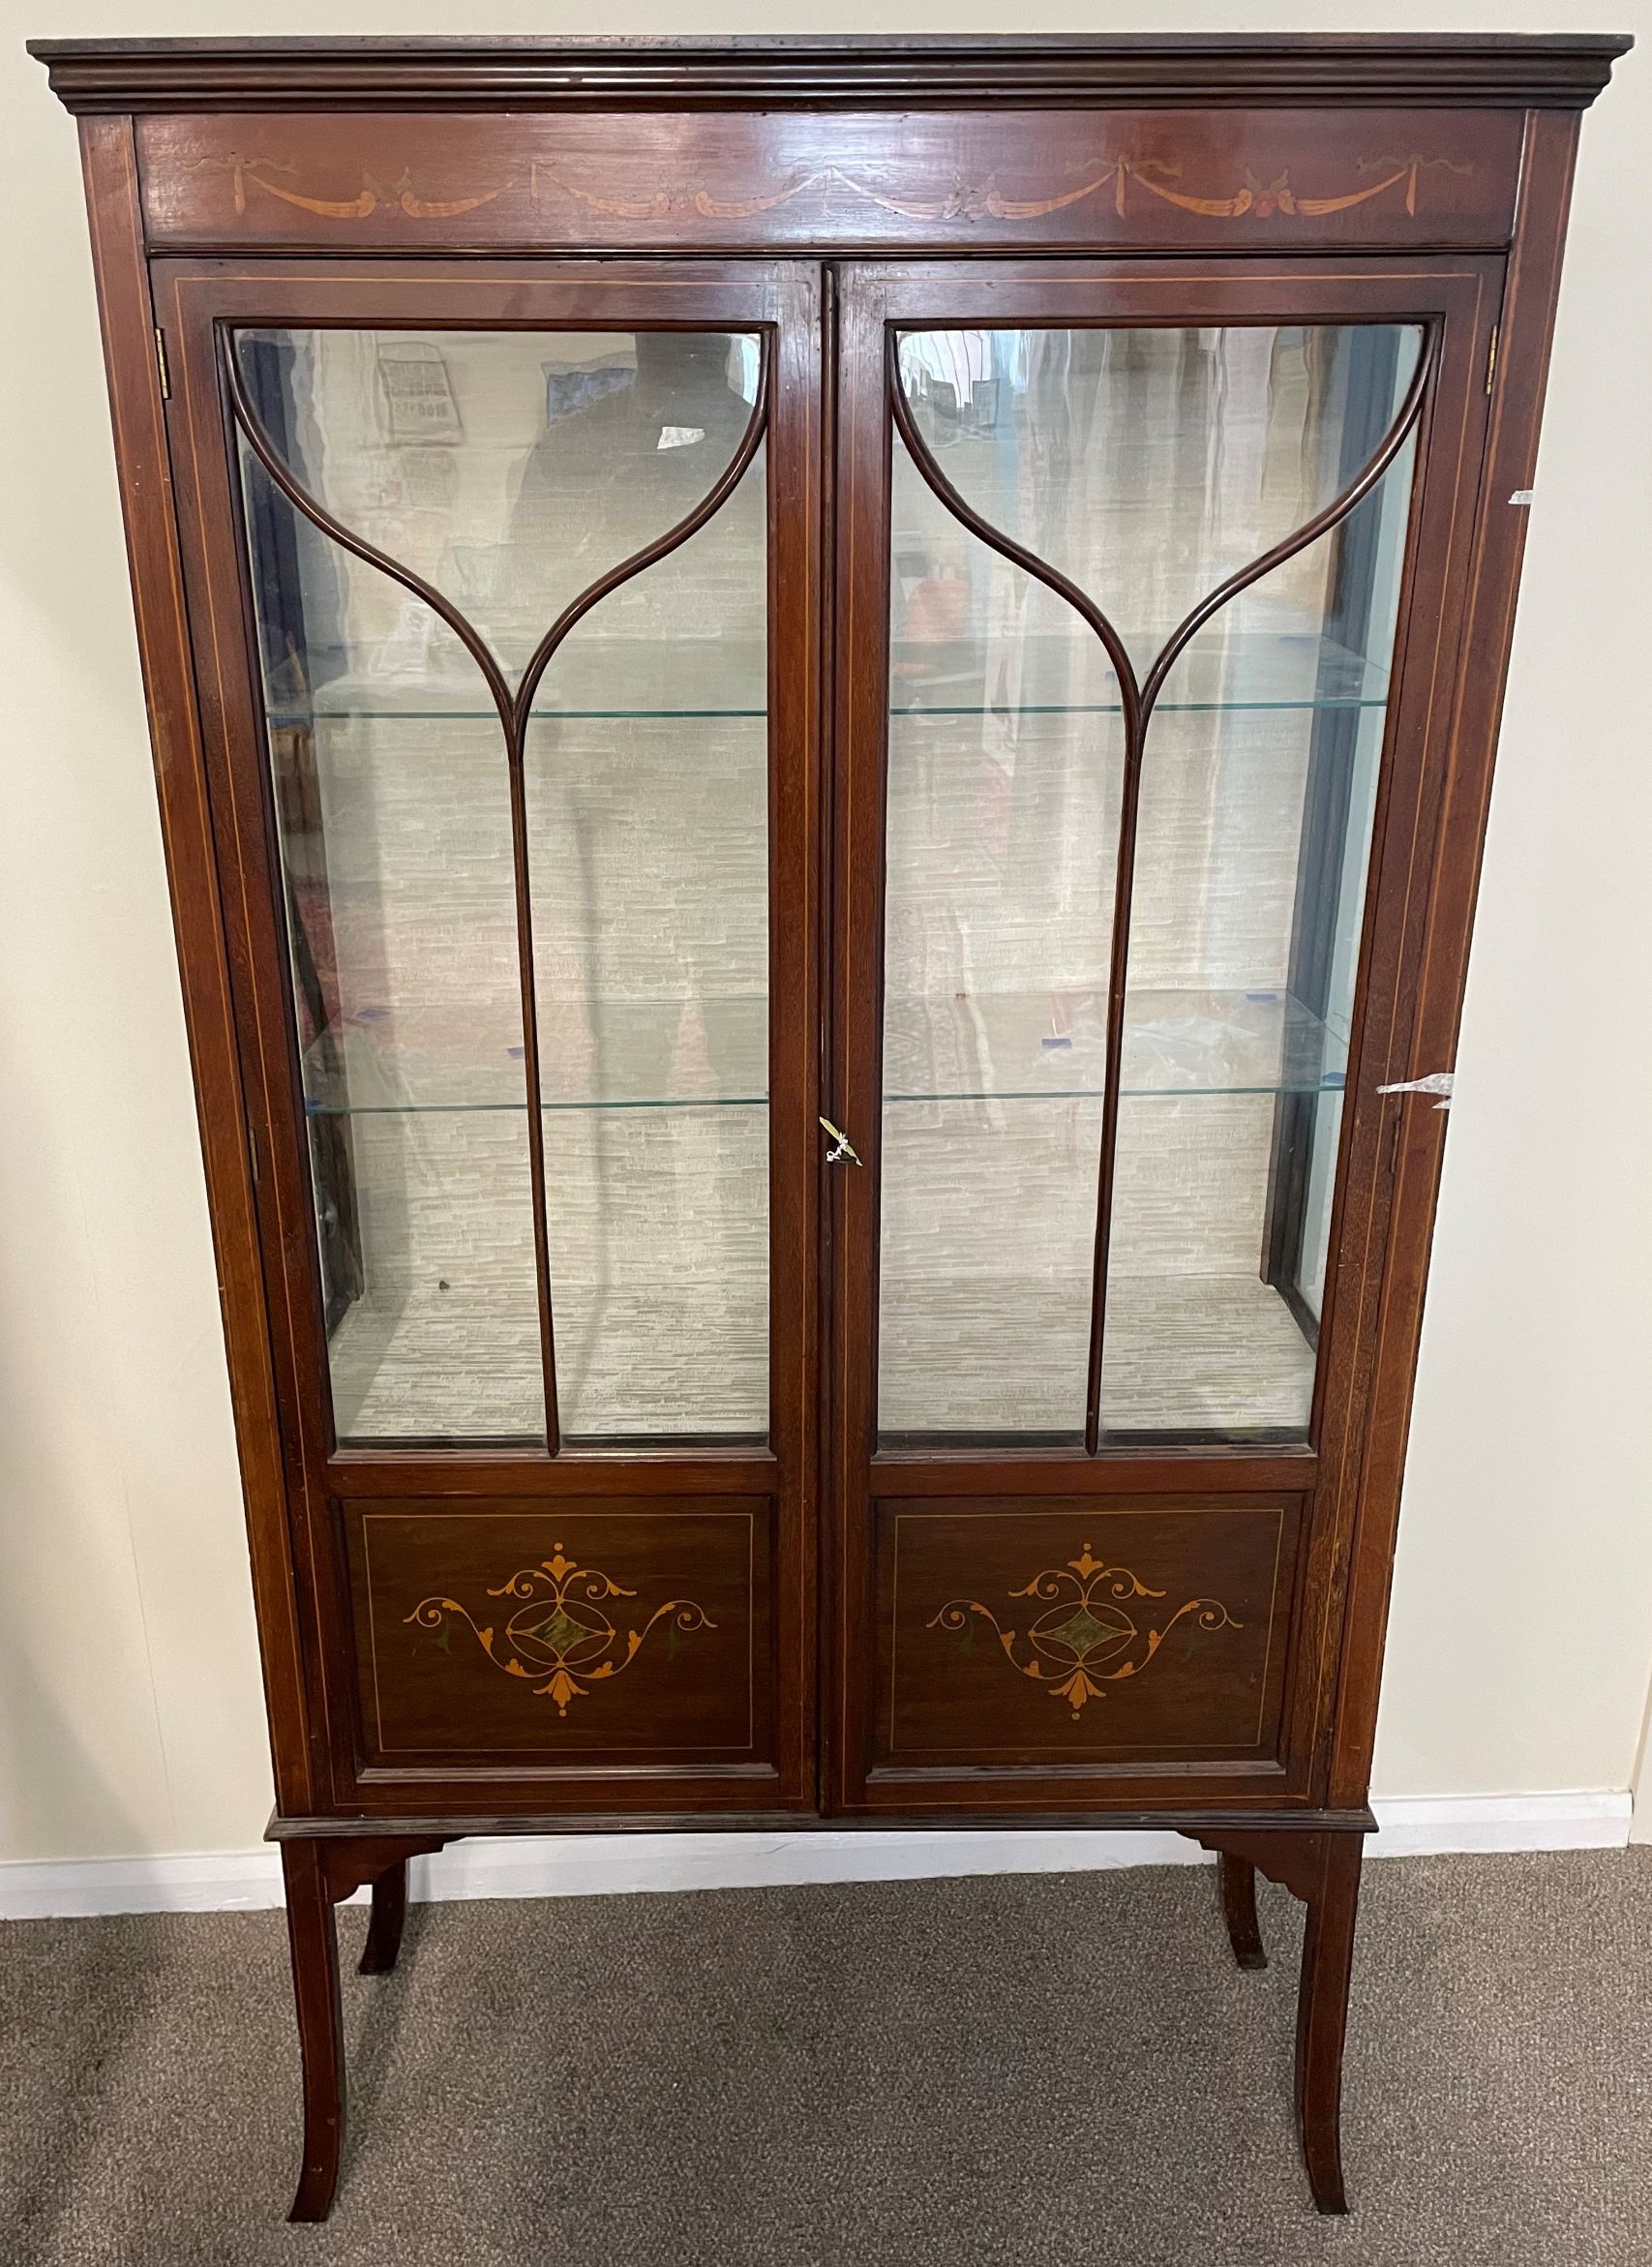 Edwardian display cabinet with painted & inlayed decoration 90cm by 32cm Ht167cm